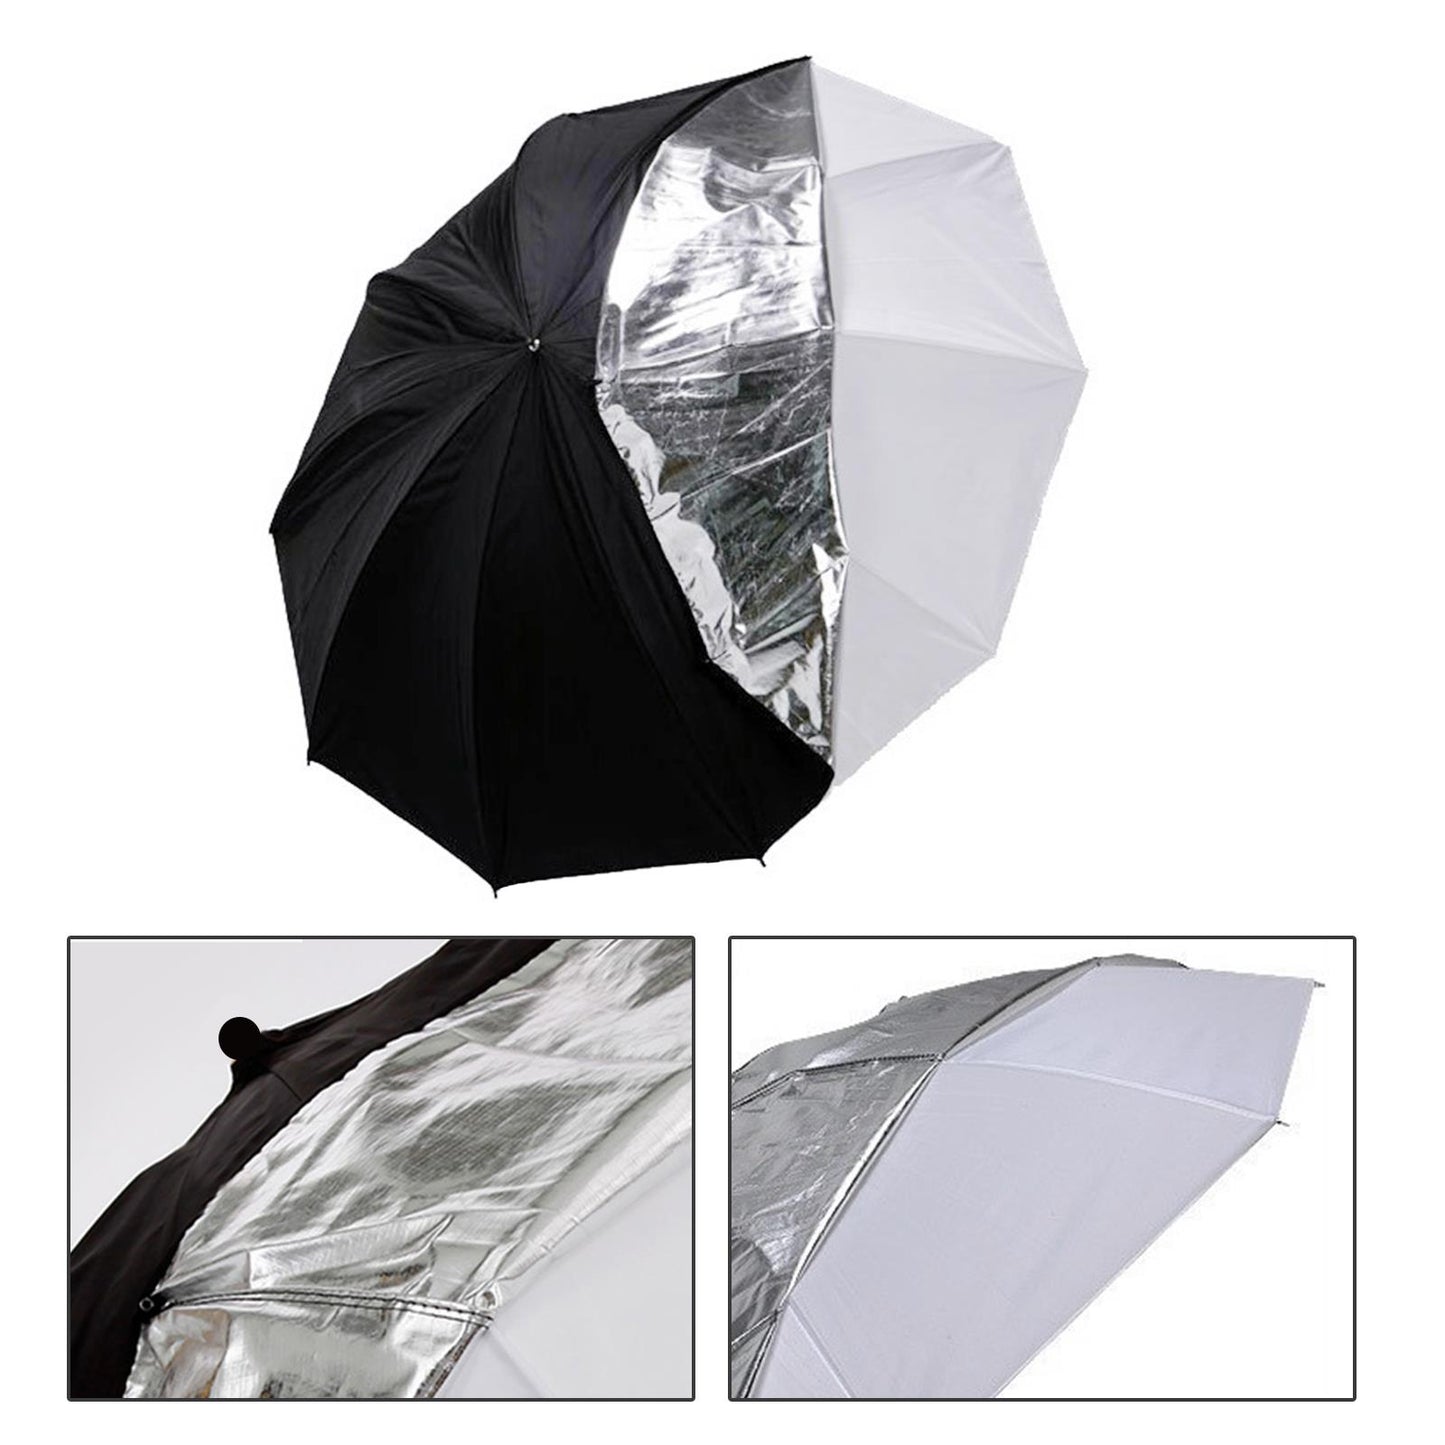 33" (84cm) Professional Umbrella with Detachable Reflector to Change to Diffuser